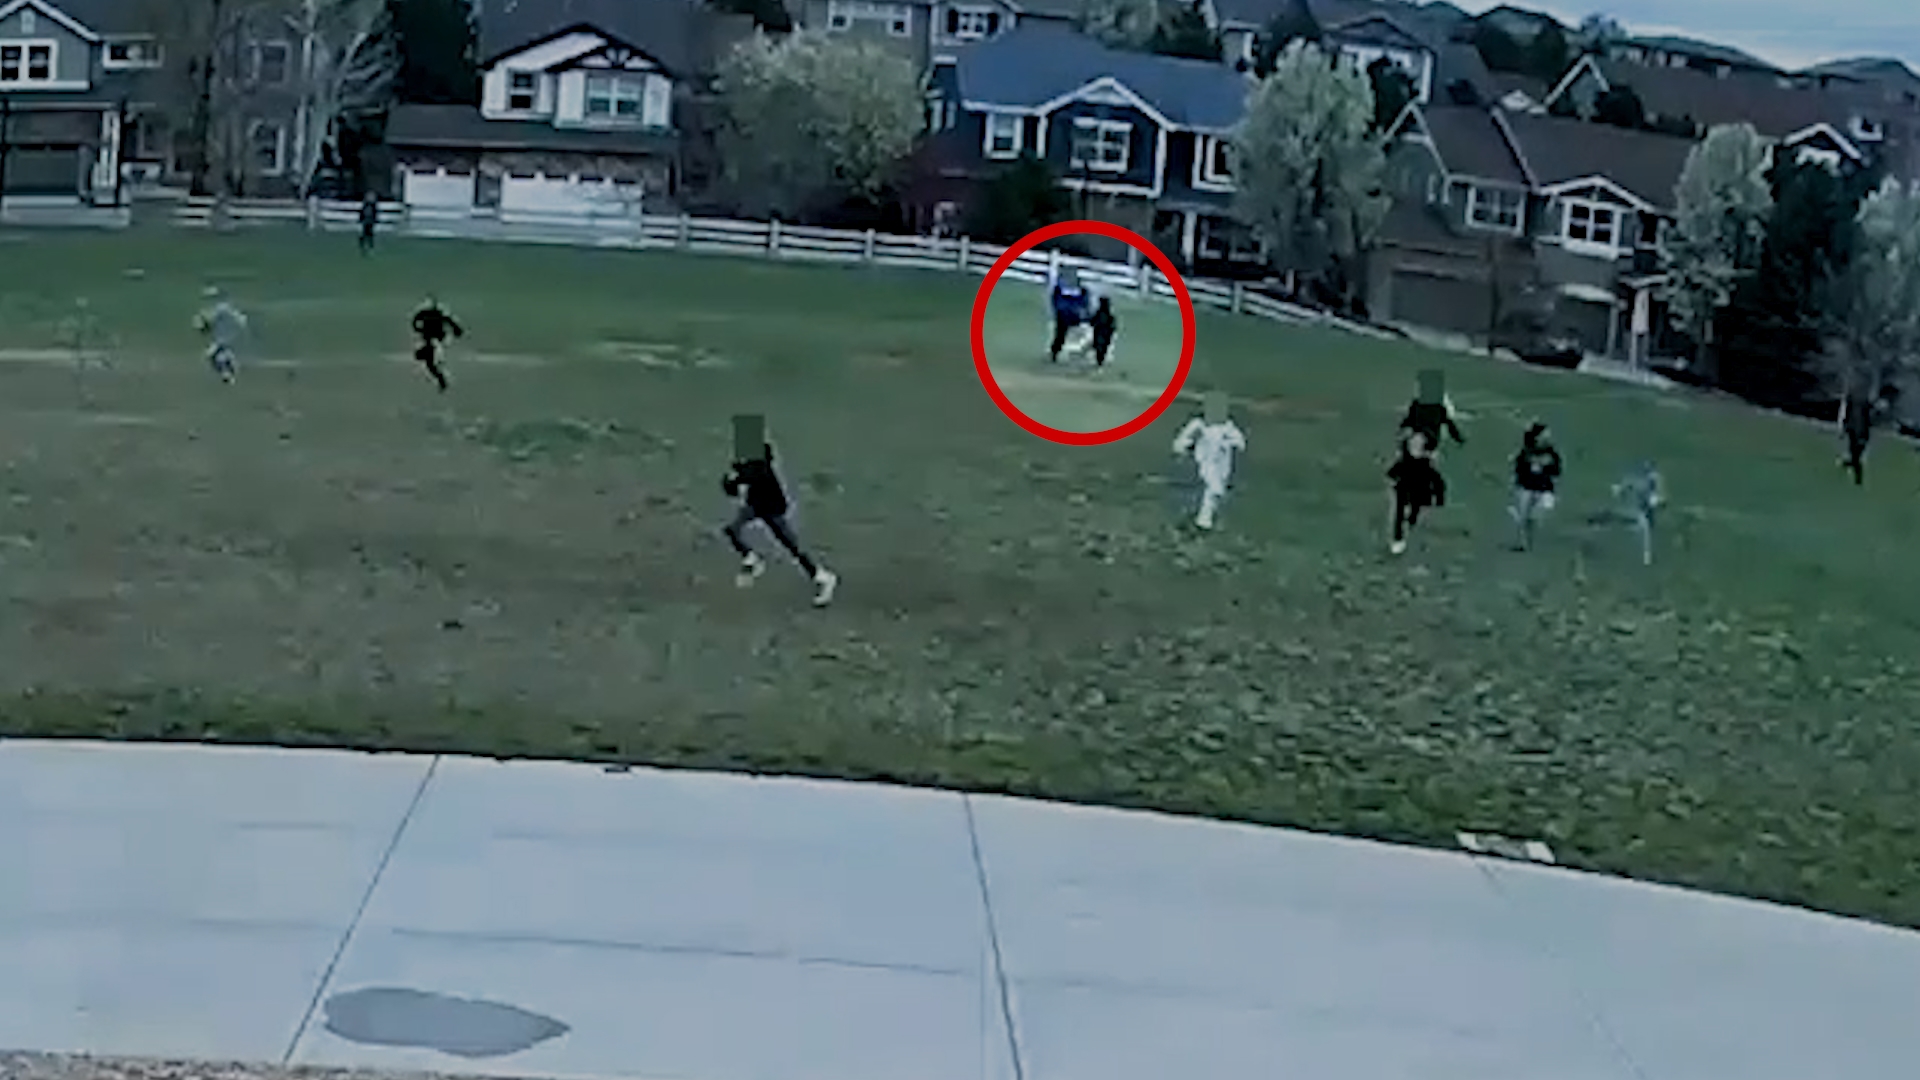 A video released by Cherry Creek School District shows an incident this month when a registered sex offender tried to grab a child at an elementary school.